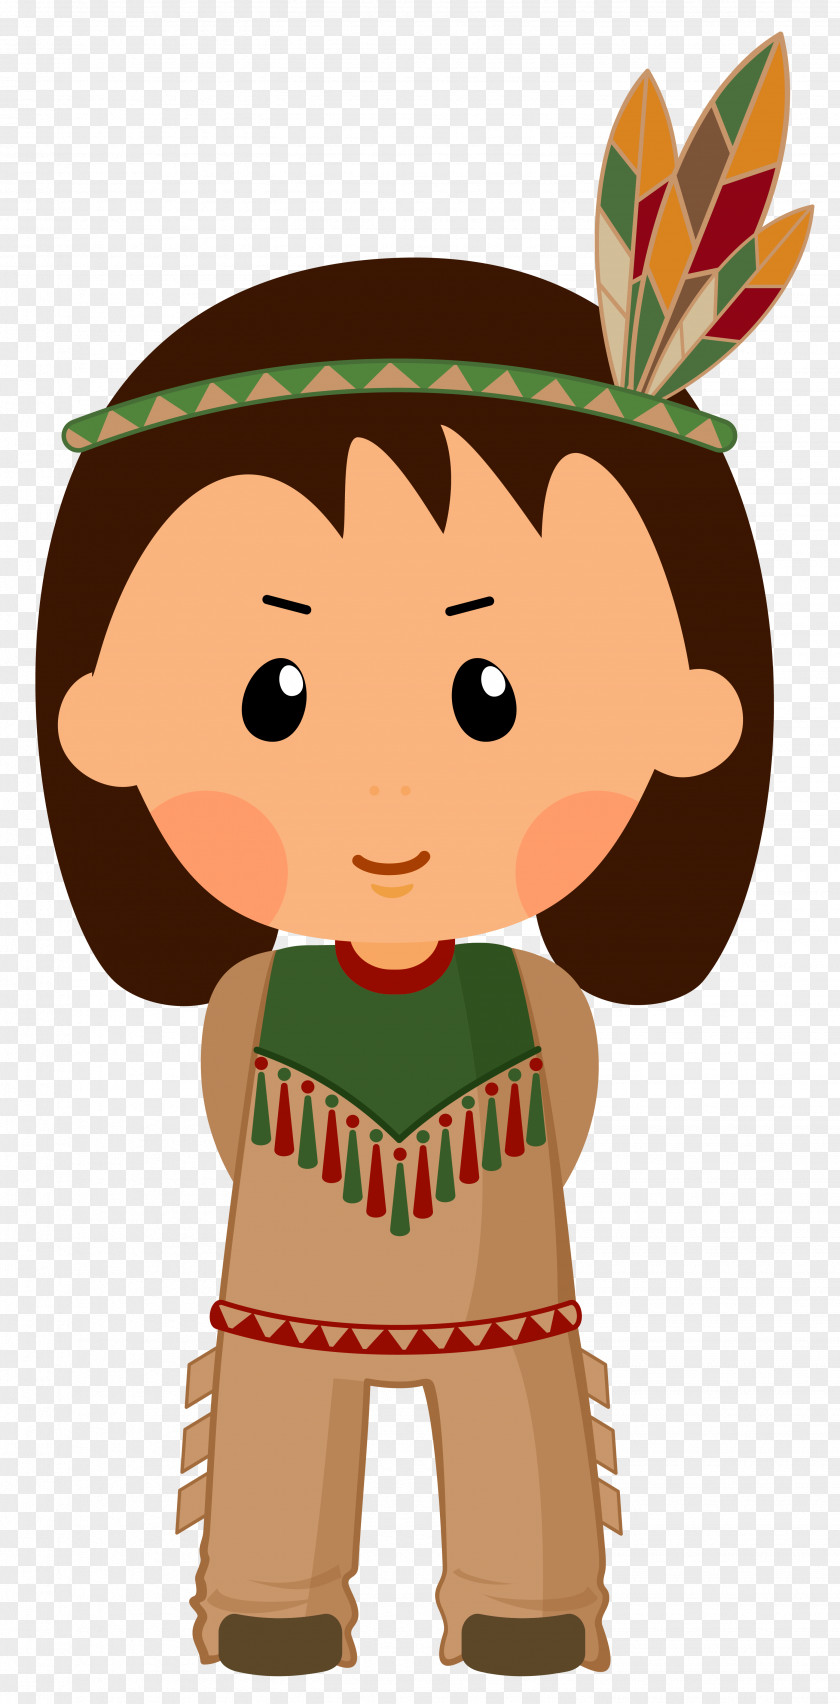 Native Americans In The United States Boy Clip Art PNG